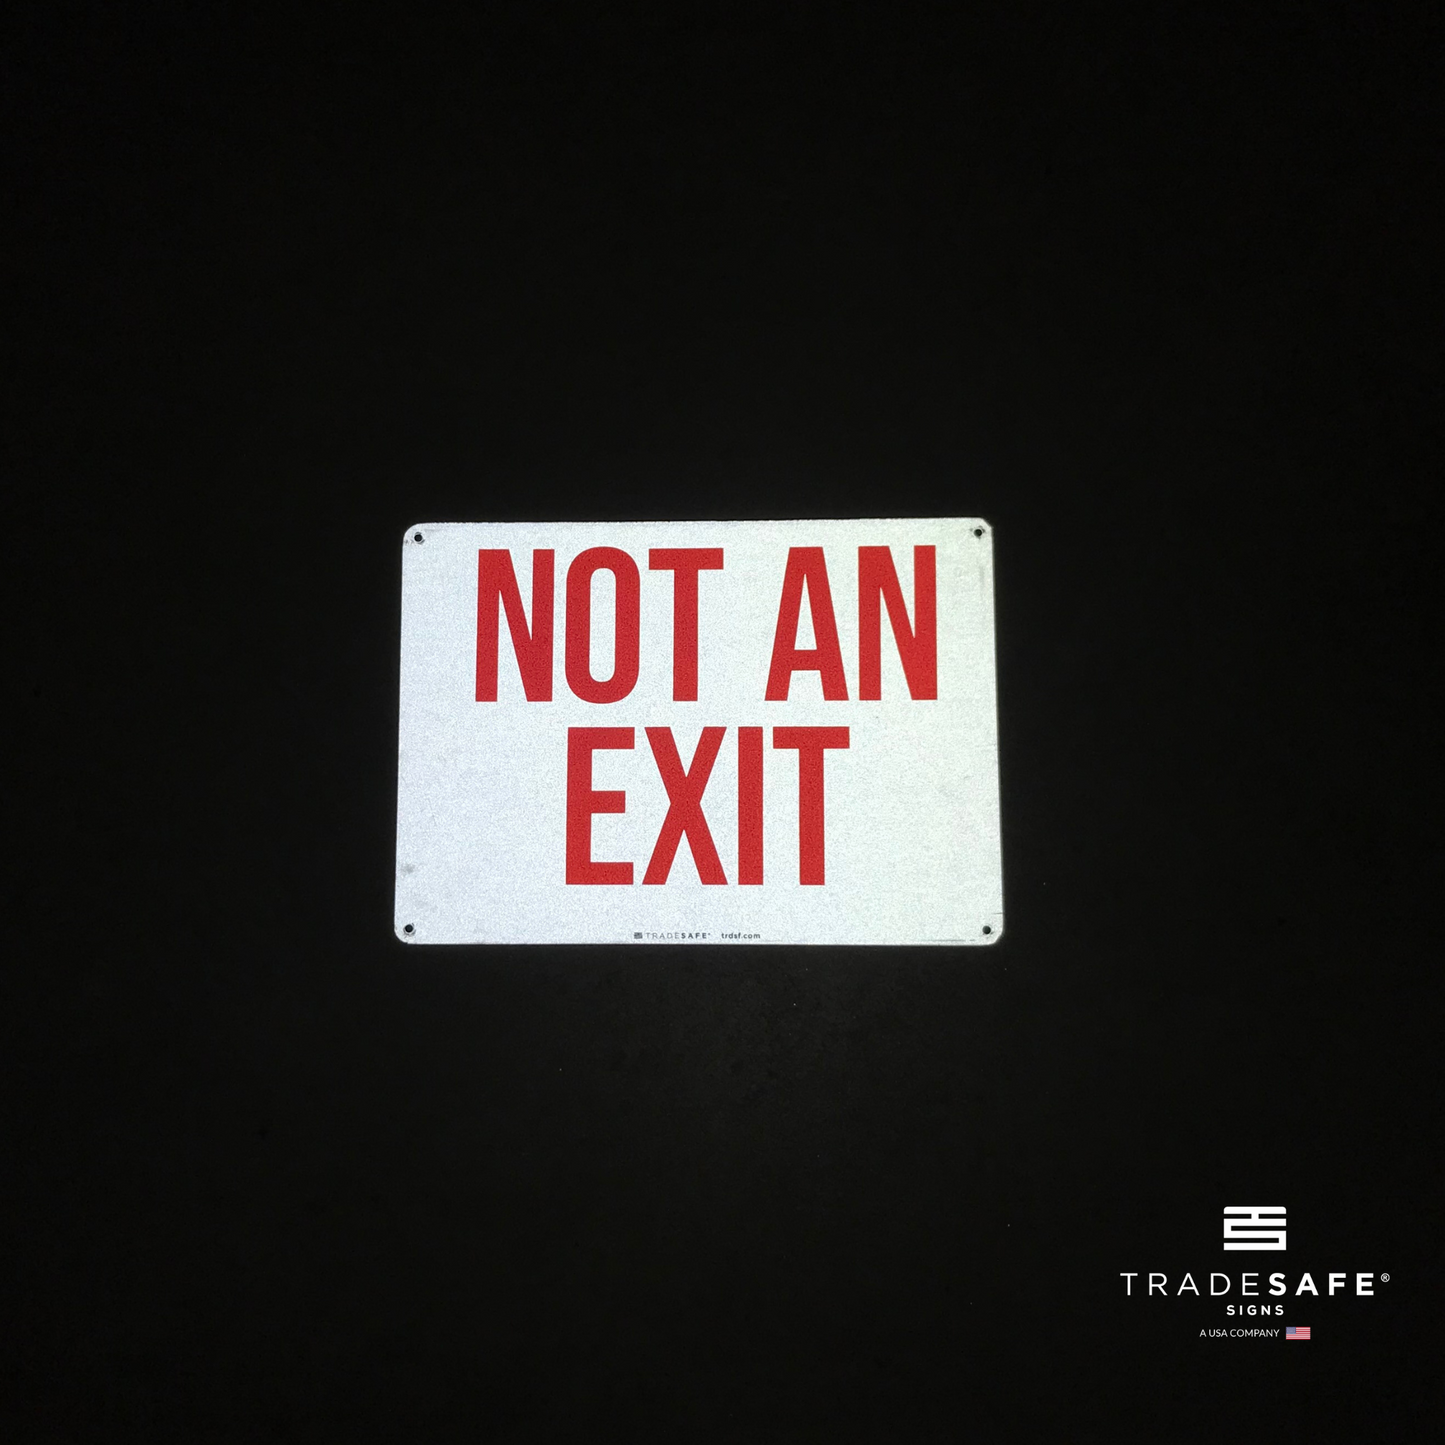 reflective attribute of not an exit sign on black background